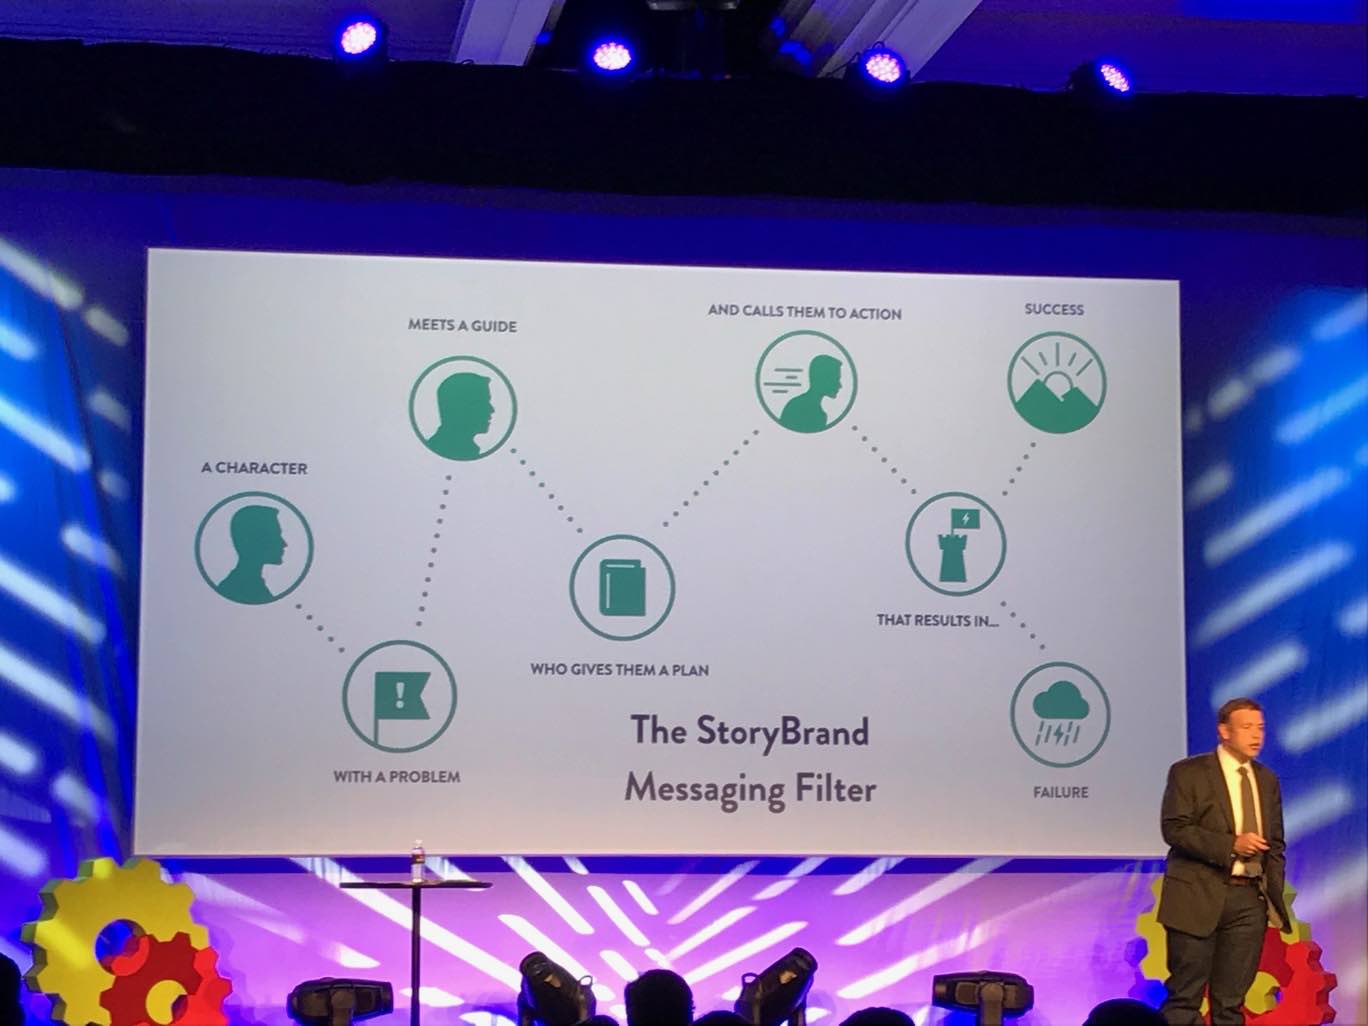 Donald Miller and the Story Brand Messaging Filter